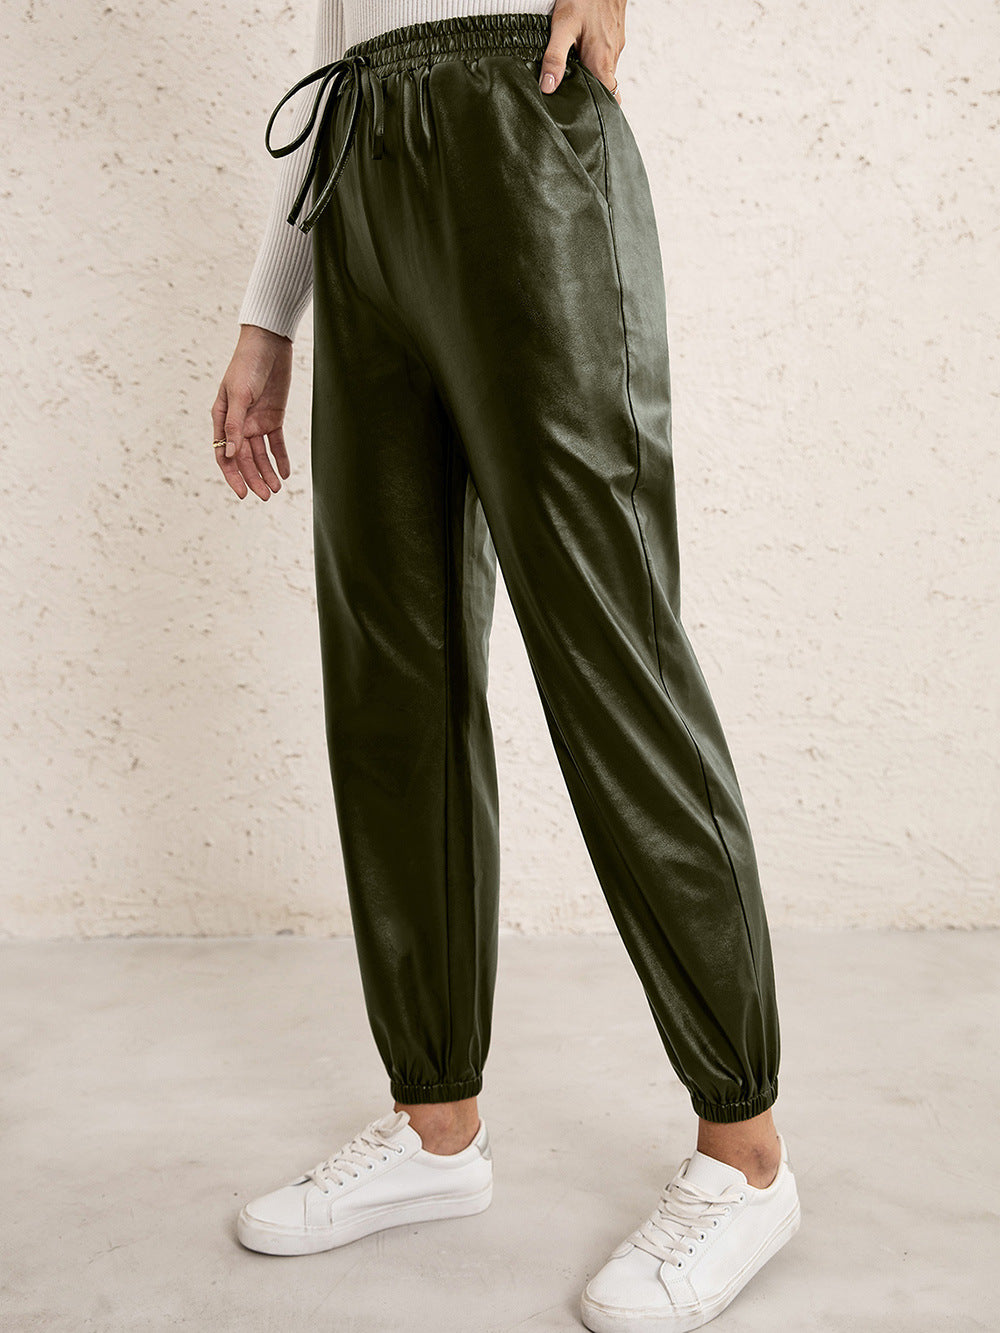 Loose Casual Biker Leather All-Matching Trousers